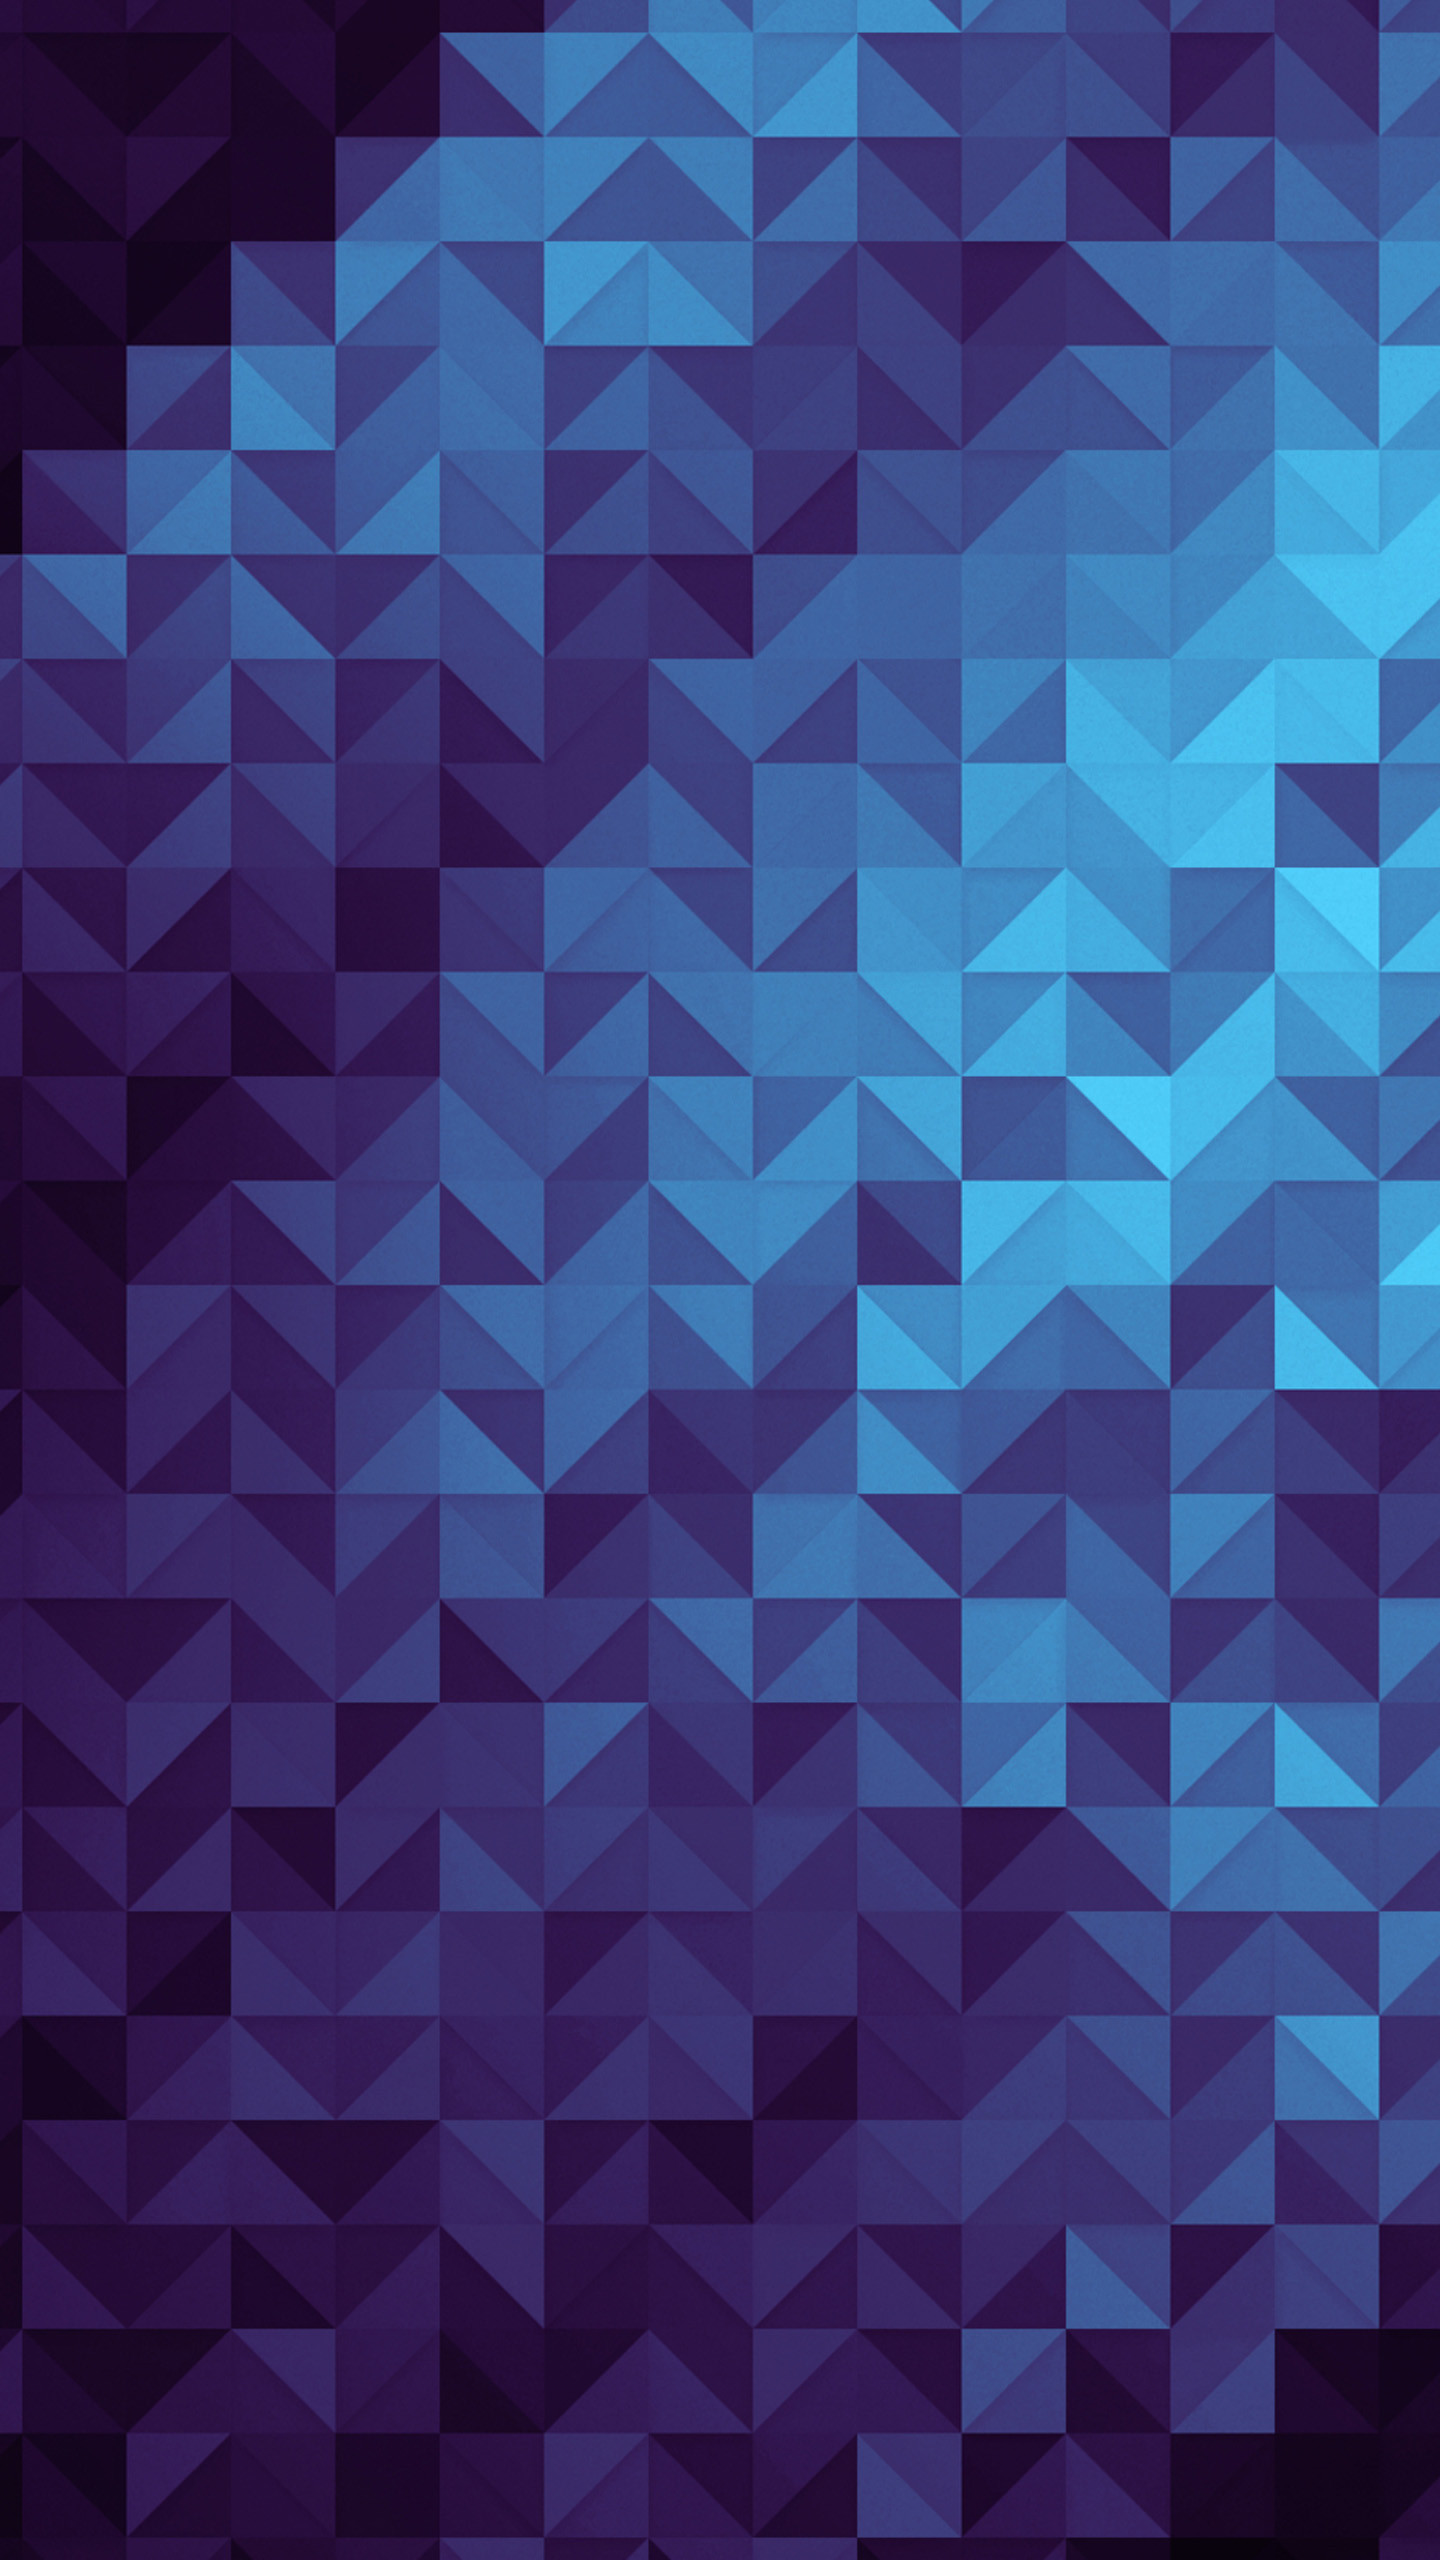 1440x2560 Colorful LG G3 Wallpapers 286. Geometric ...